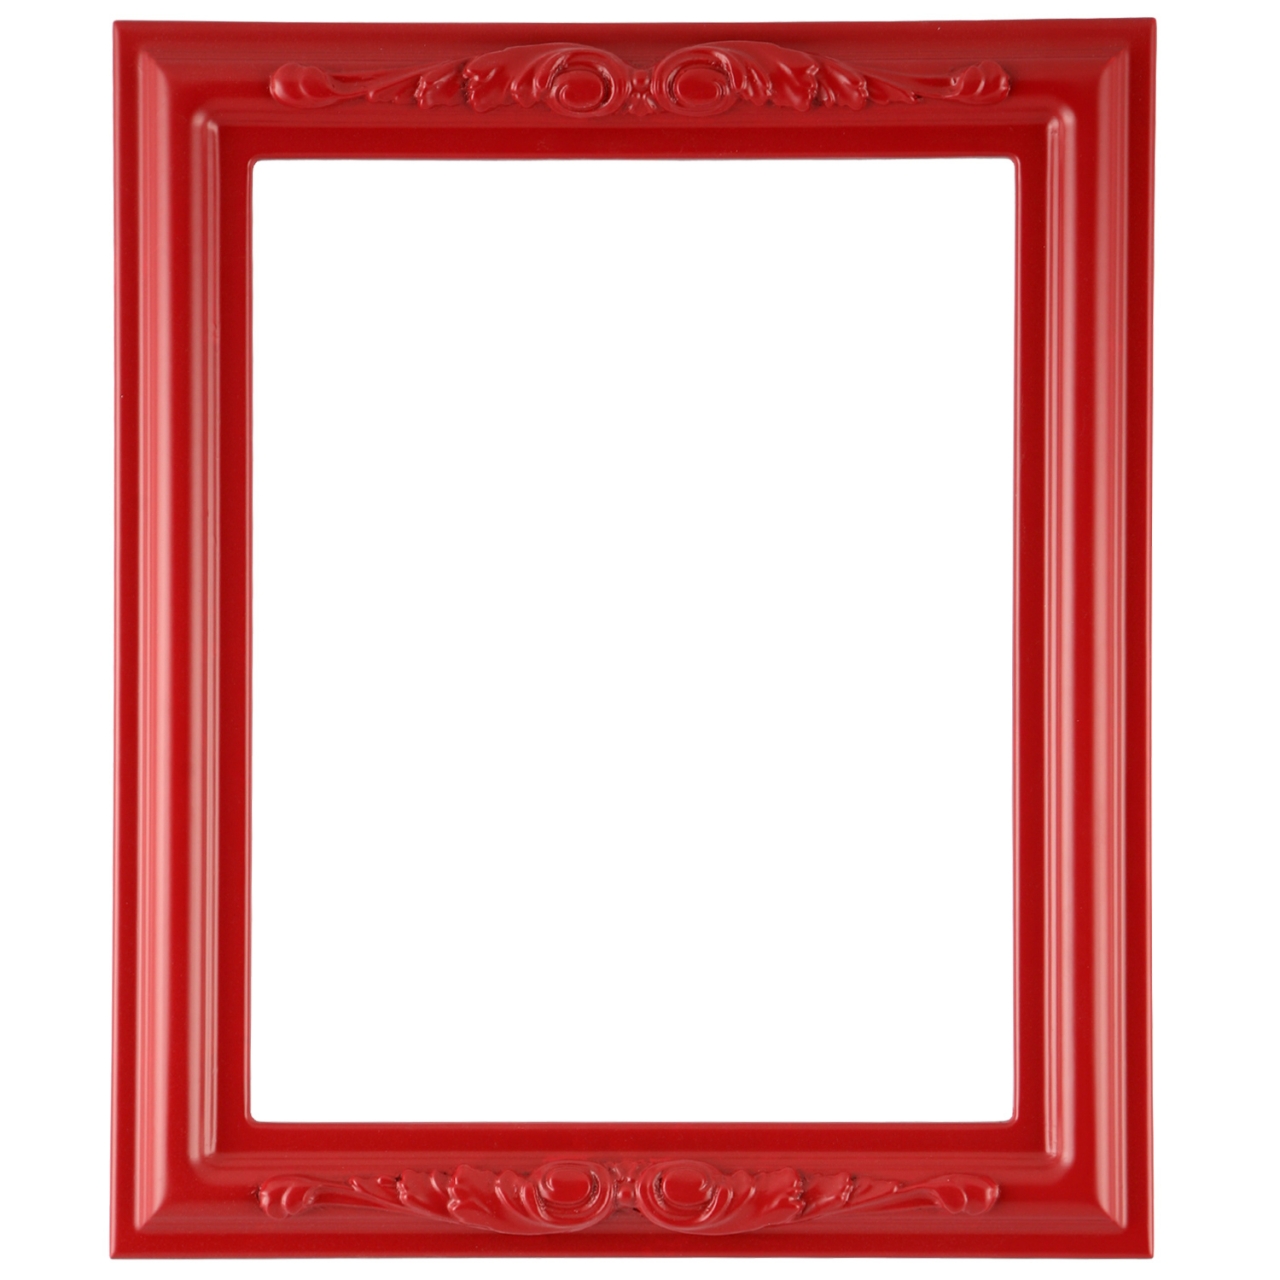 red frame clipart - photo #43